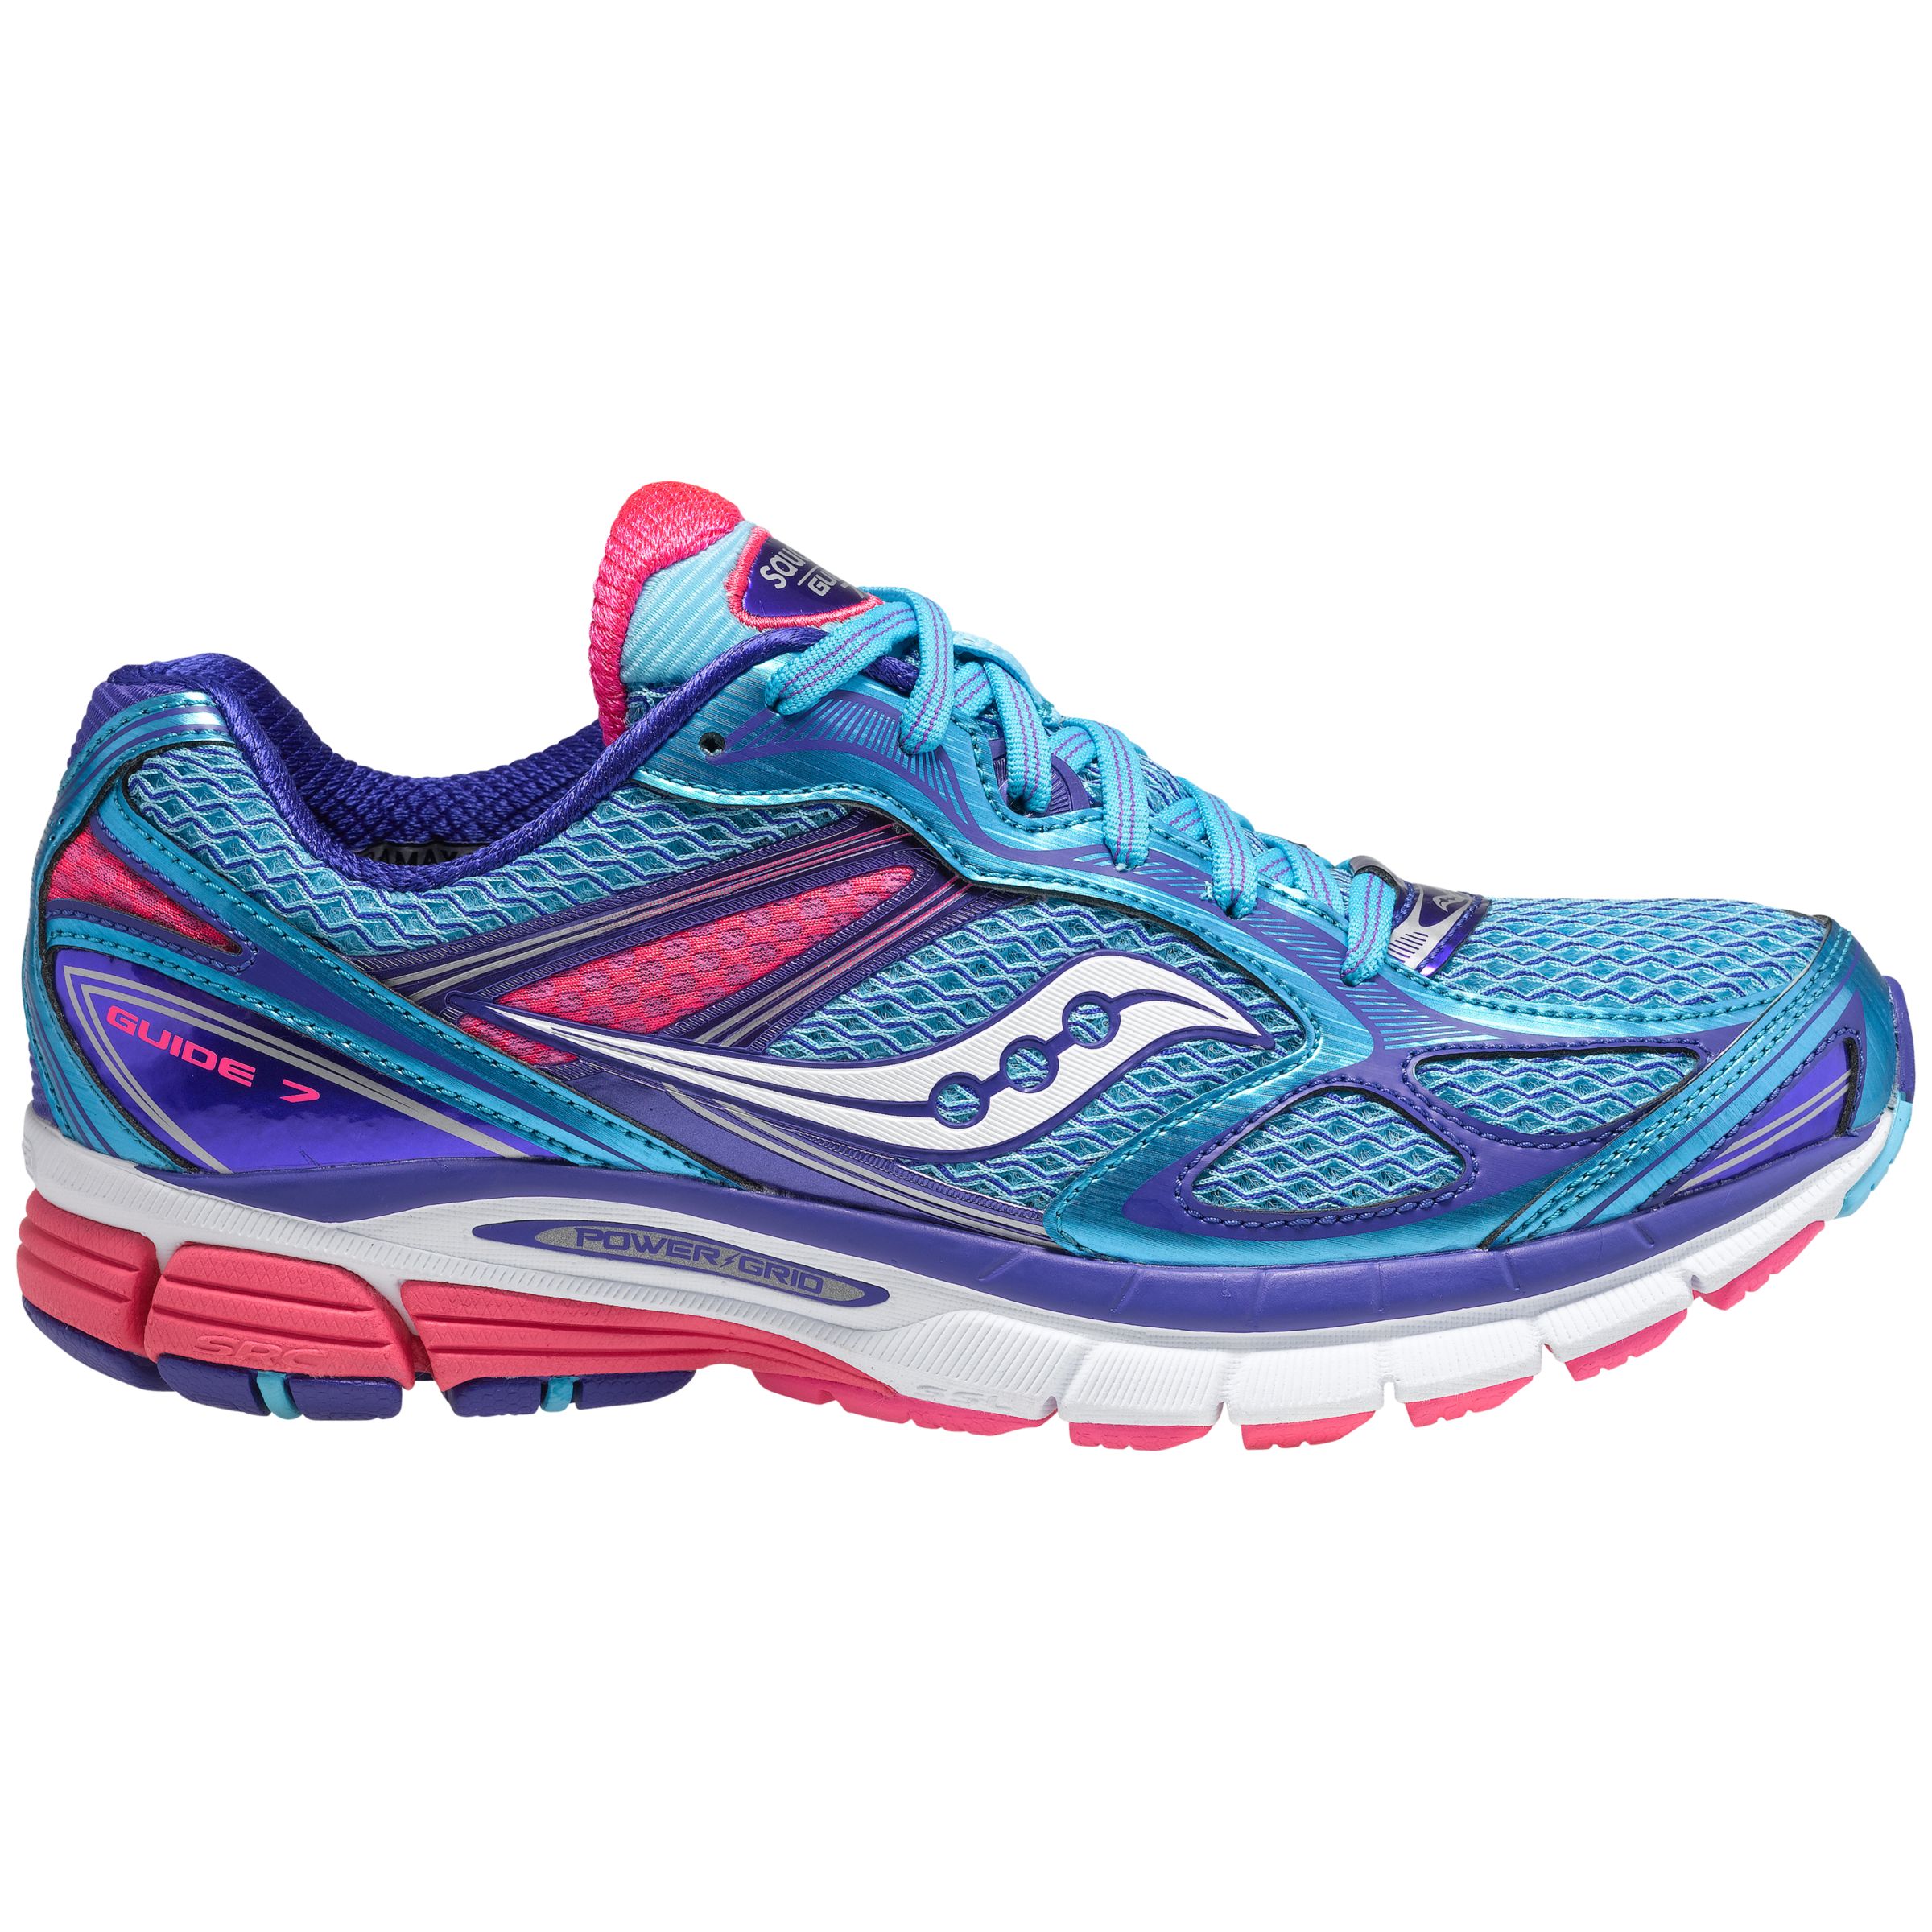 Saucony Guide 7 Women's Running Shoes, Blue/Pink at John Lewis \u0026 Partners